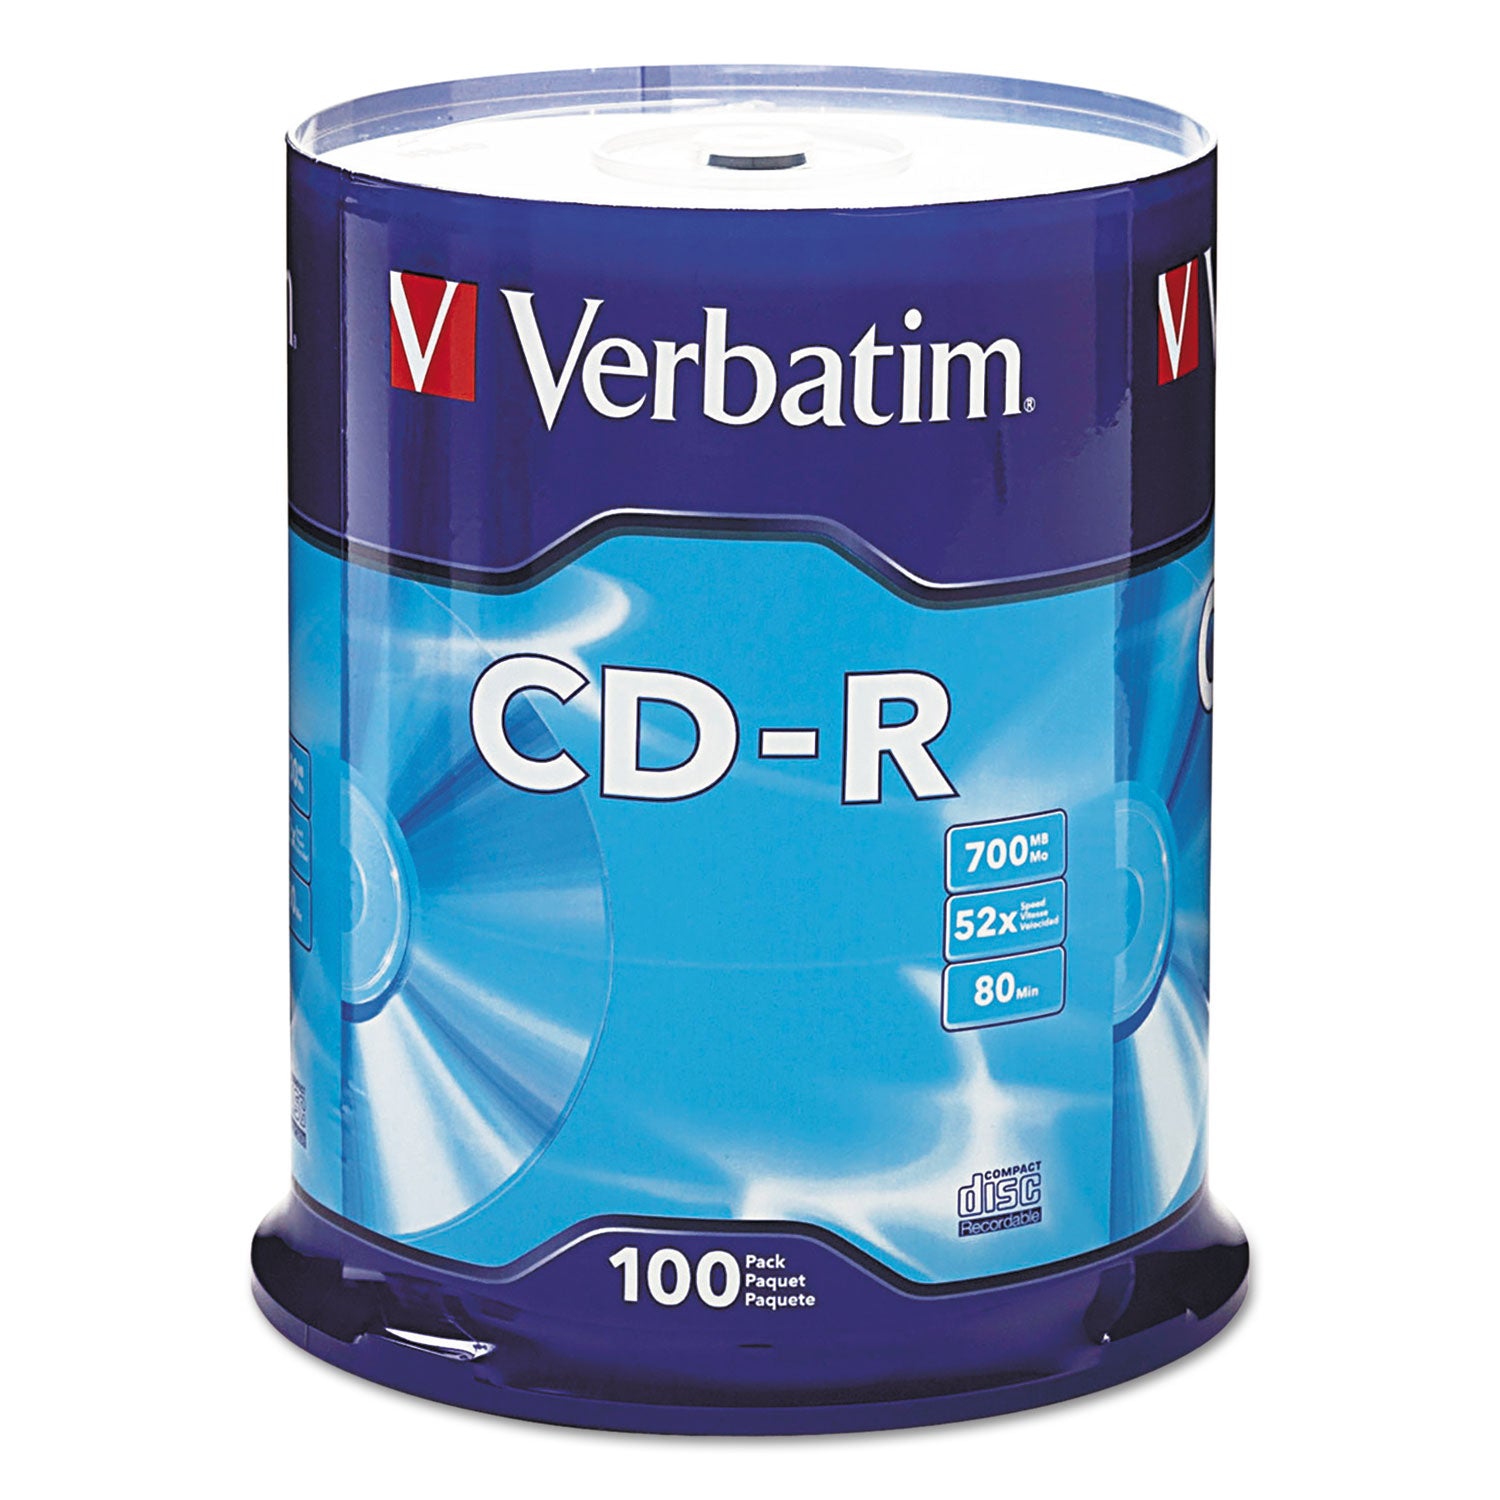 CD-R Recordable Disc, 700 MB/80 min, 52x, Spindle, Silver, 100/Pack - 